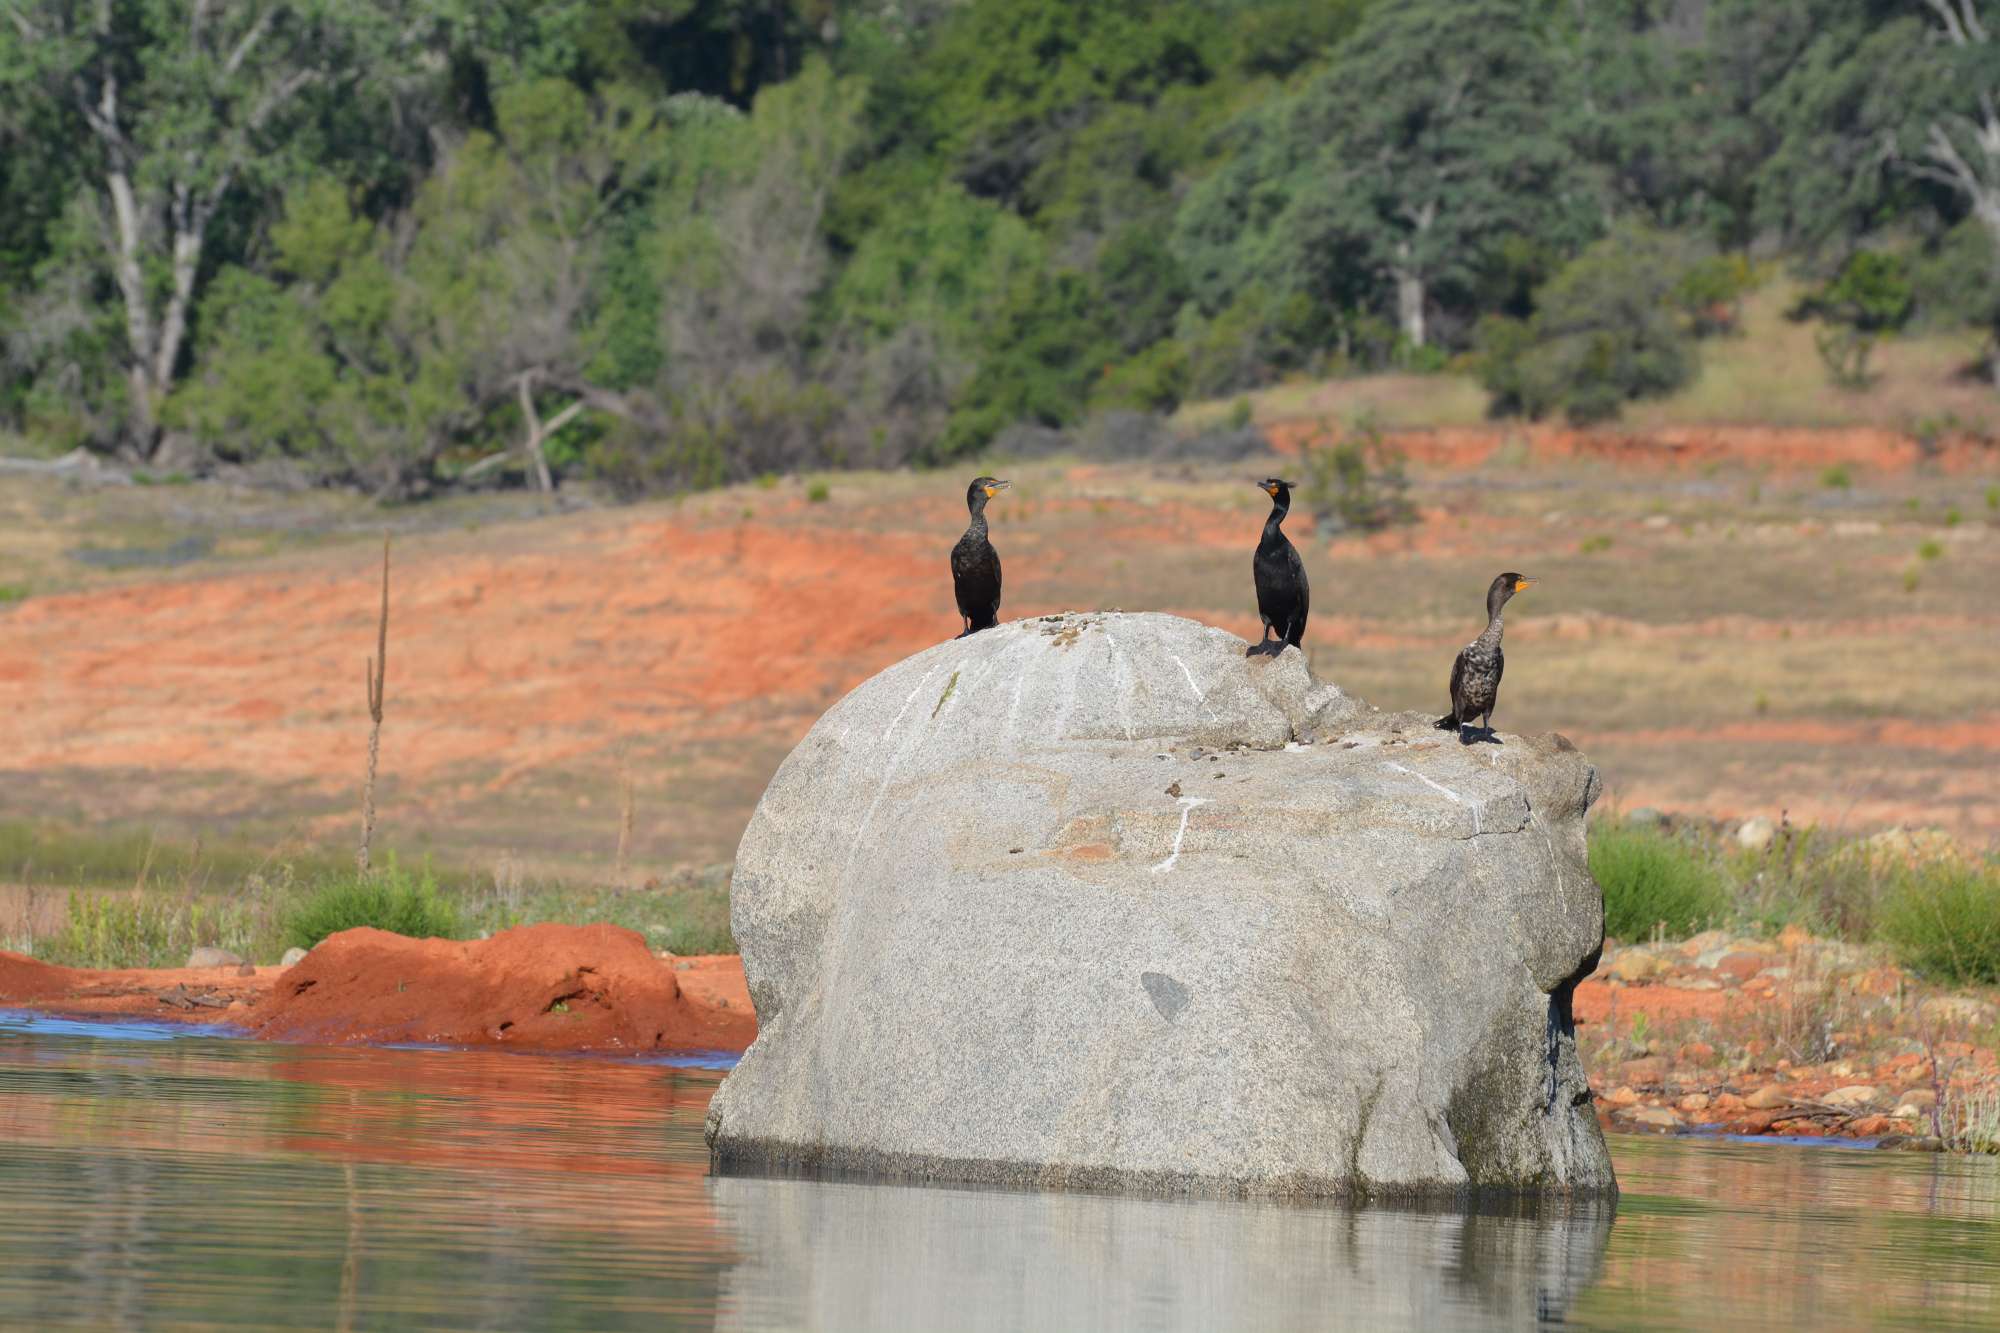 These cormorants are guarding the area with their lives.